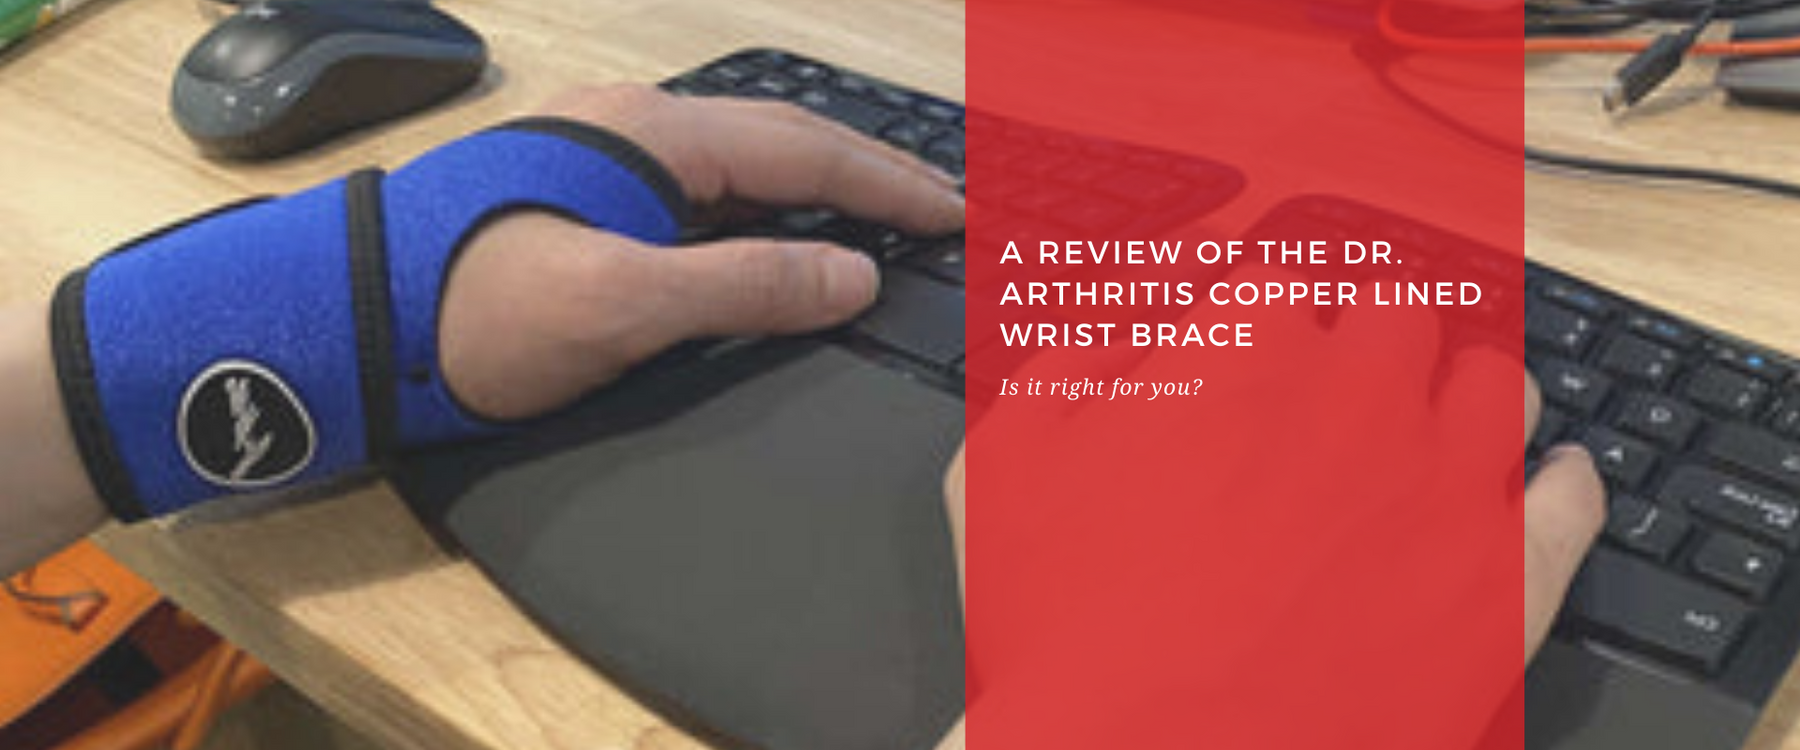 A Review of the Dr. Arthritis Copper Lined Wrist Brace: Is It Right for You?